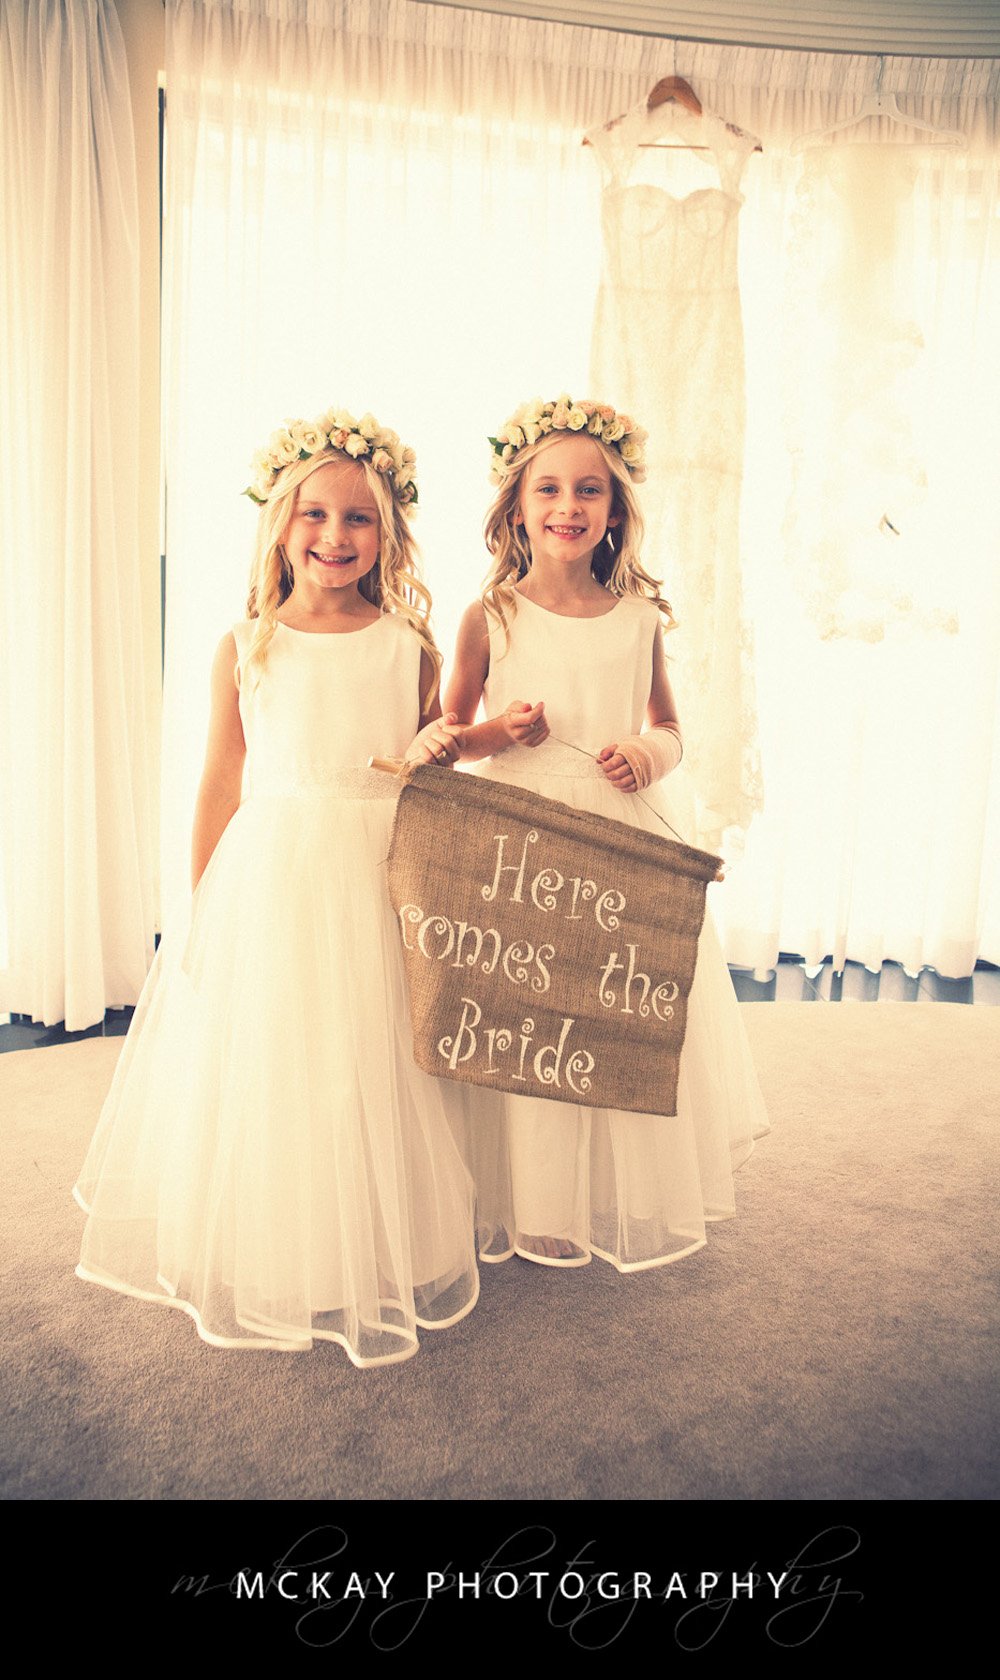 Very cute flower girls and sign! Kate David Wedding 